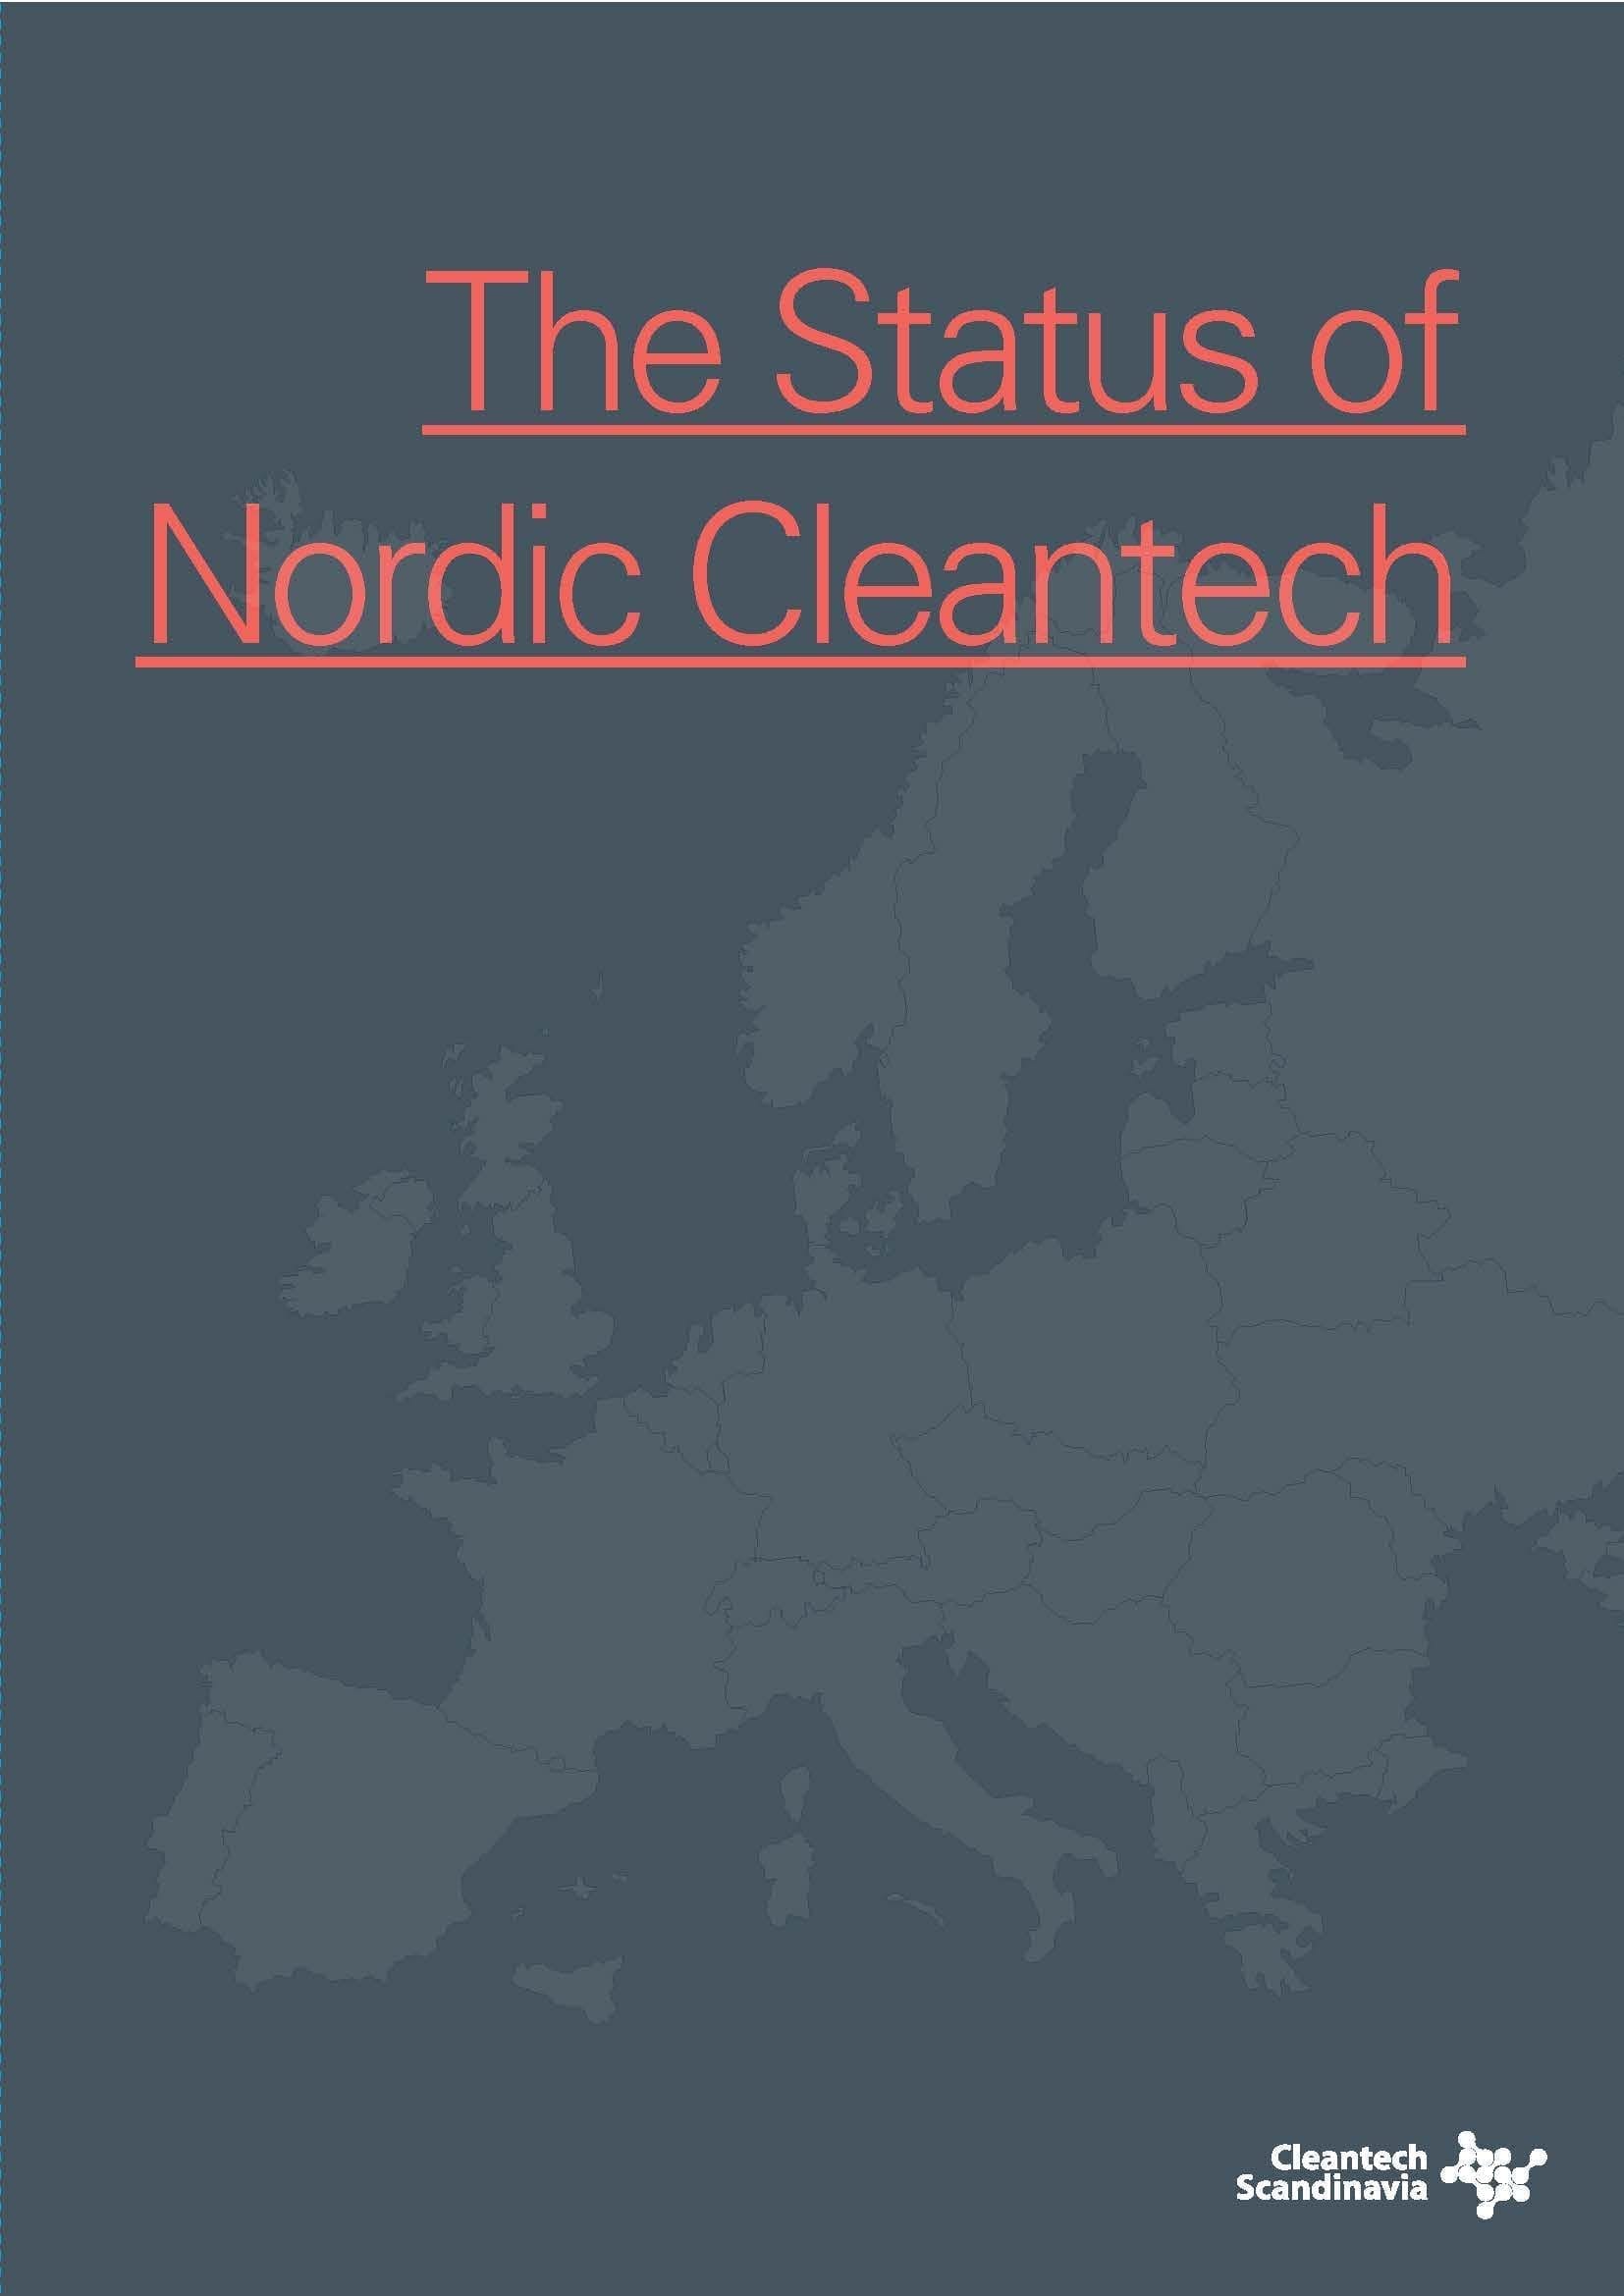 The Status of Nordic Cleantech